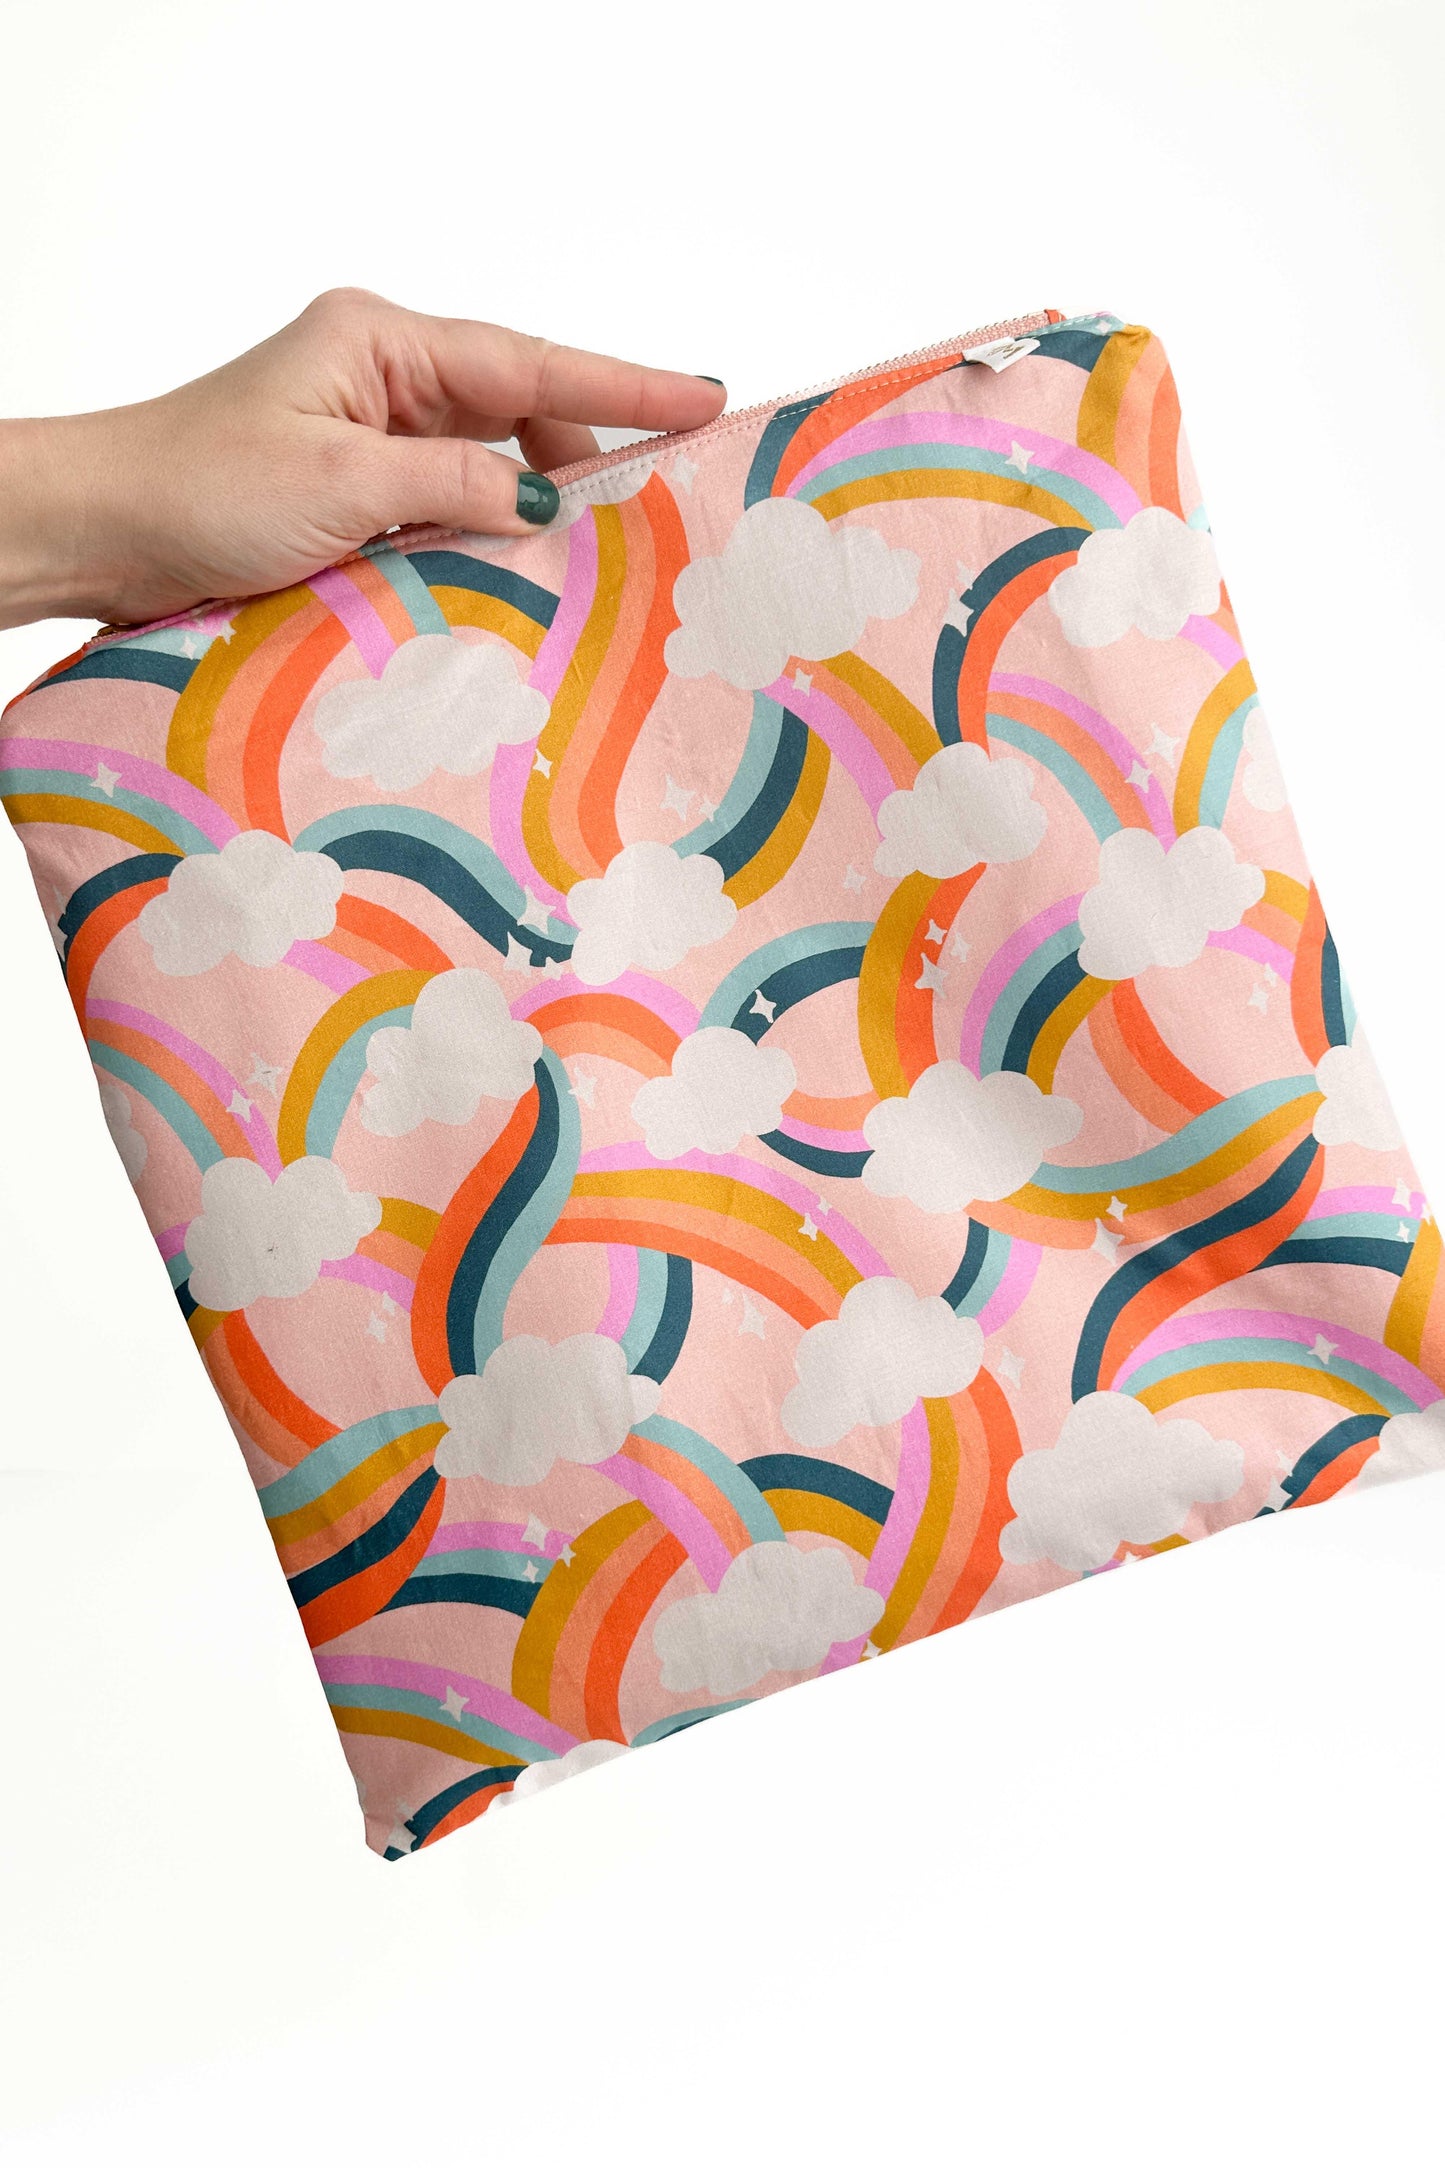 Daydream Large Wet Bag READY TO SHIP - Modern Makerie